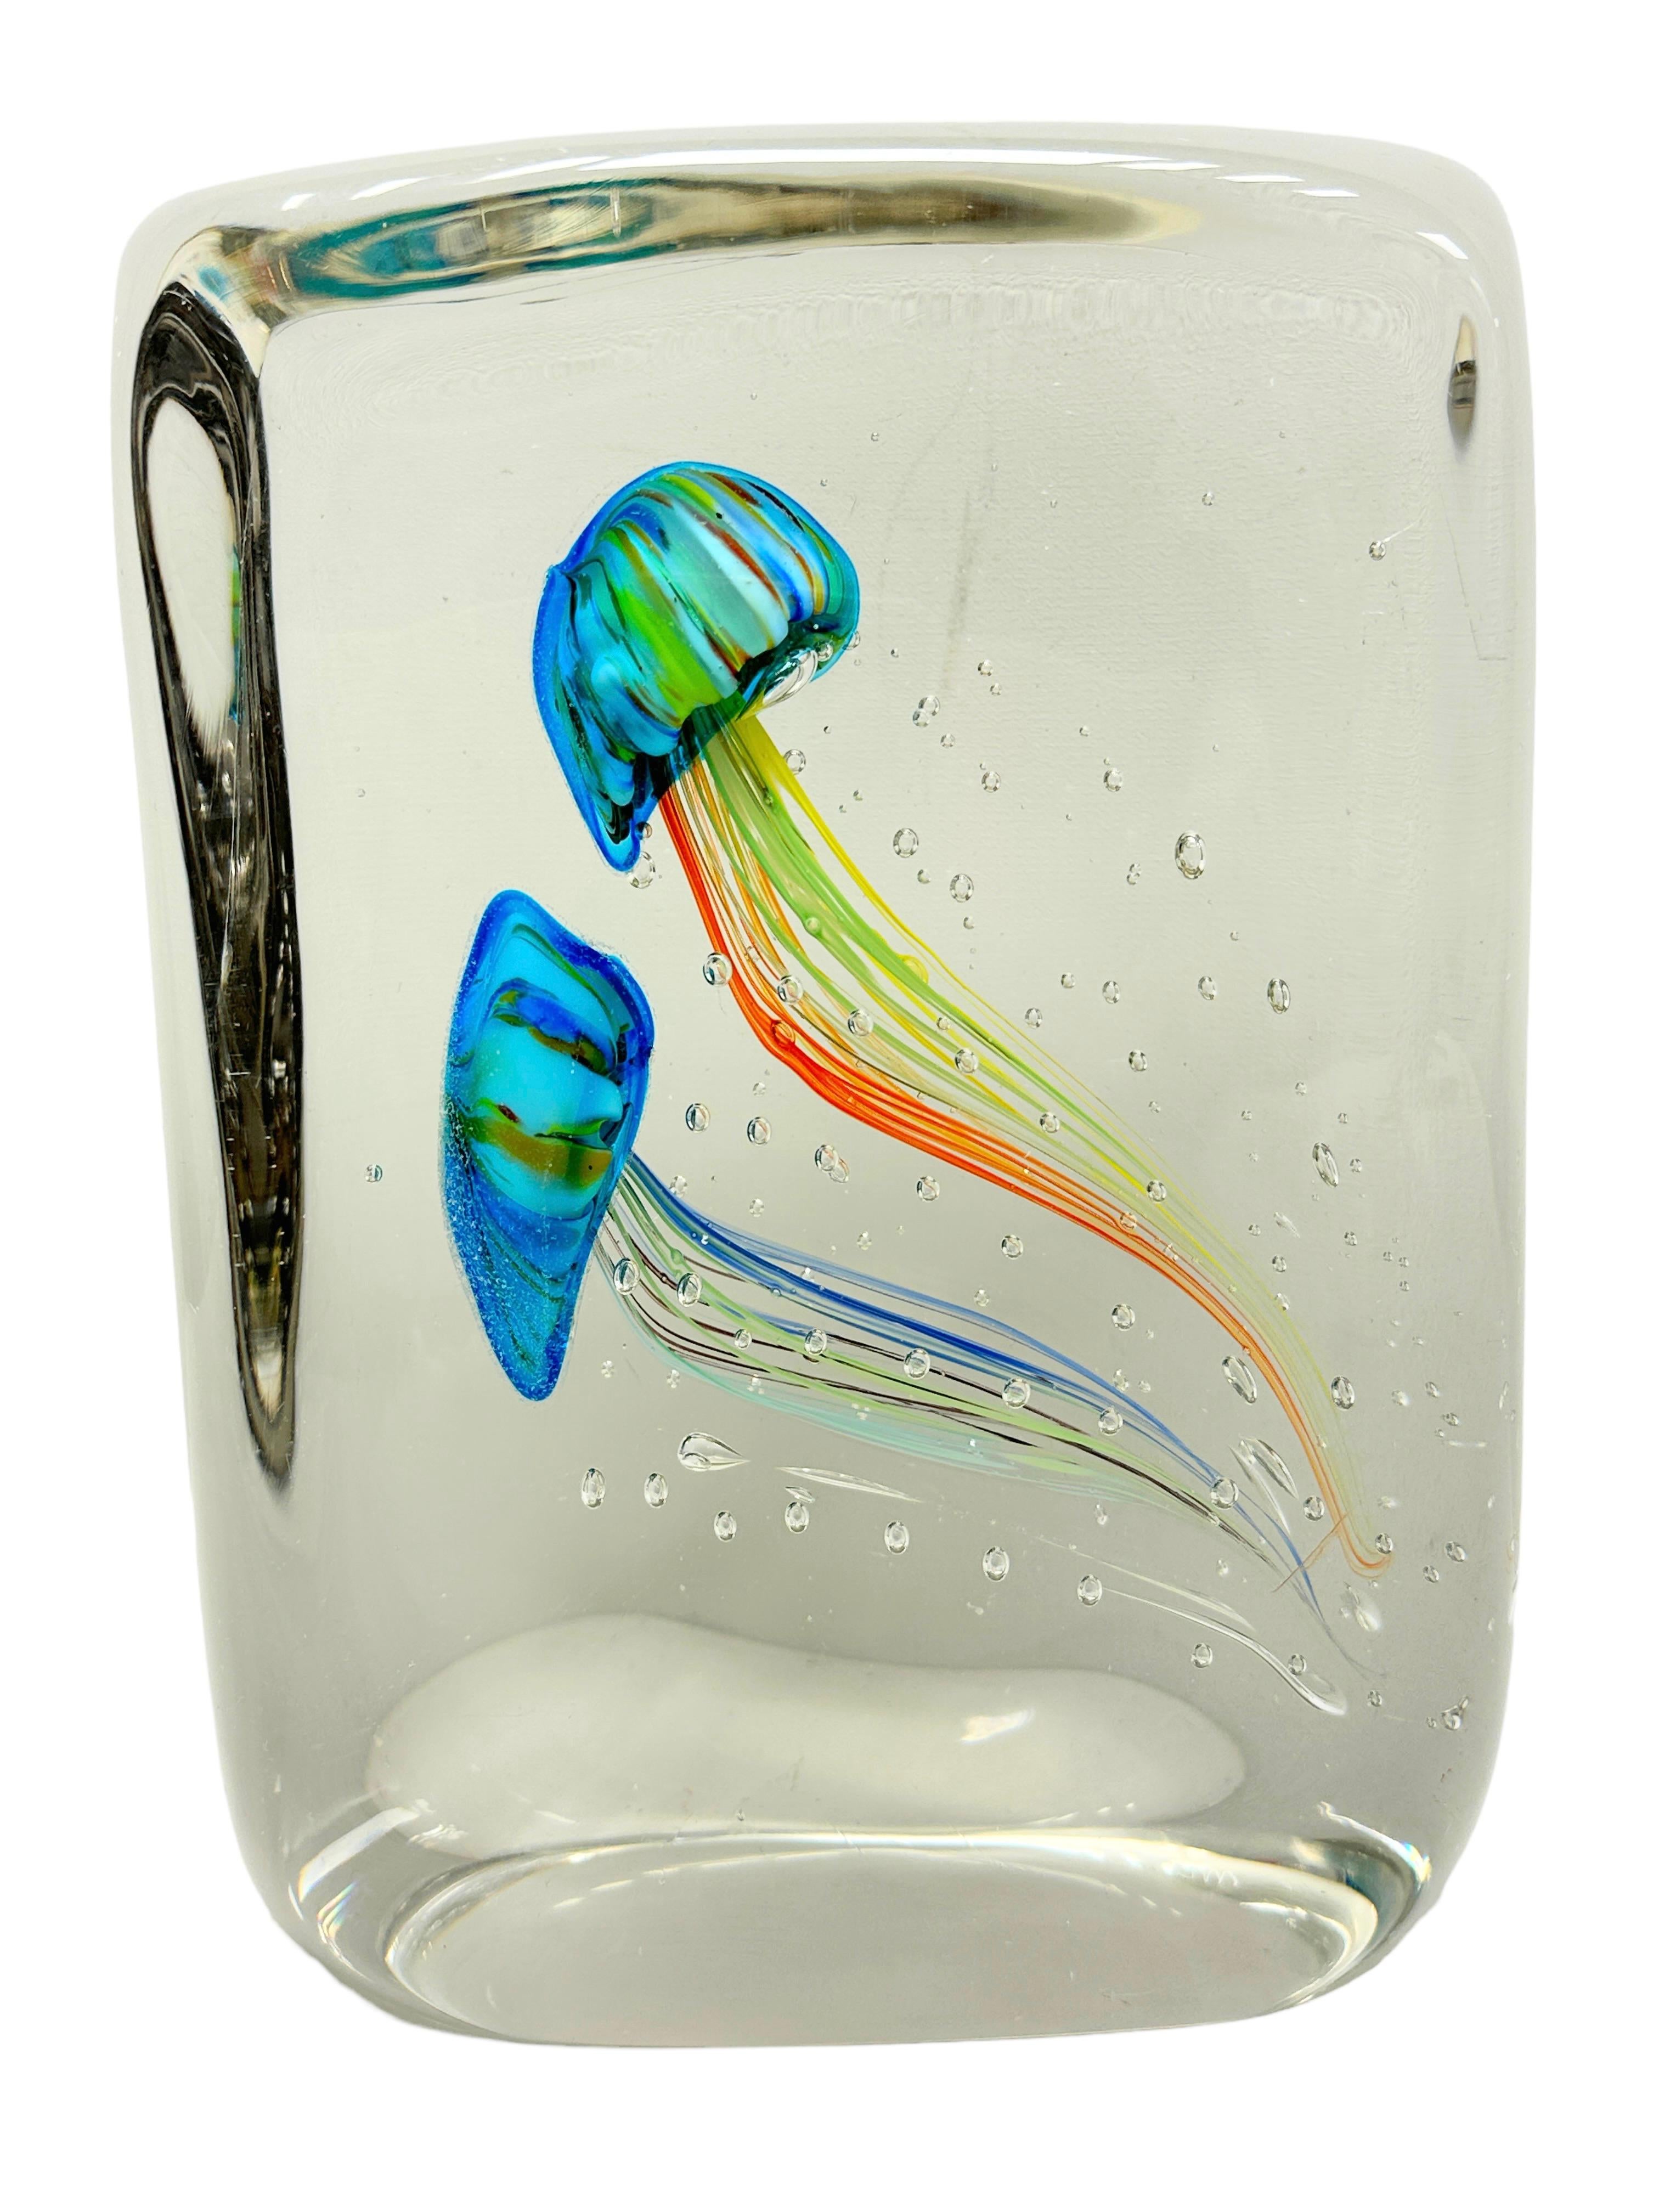 This beautiful stunning large Murano hand blown aquarium design Italian art glass sculpture was most likely made in the 1980s in Italy. It's showing two Jelly Fish inside, in two different colors, floating on controlled bubbles. 
Murano glass is a